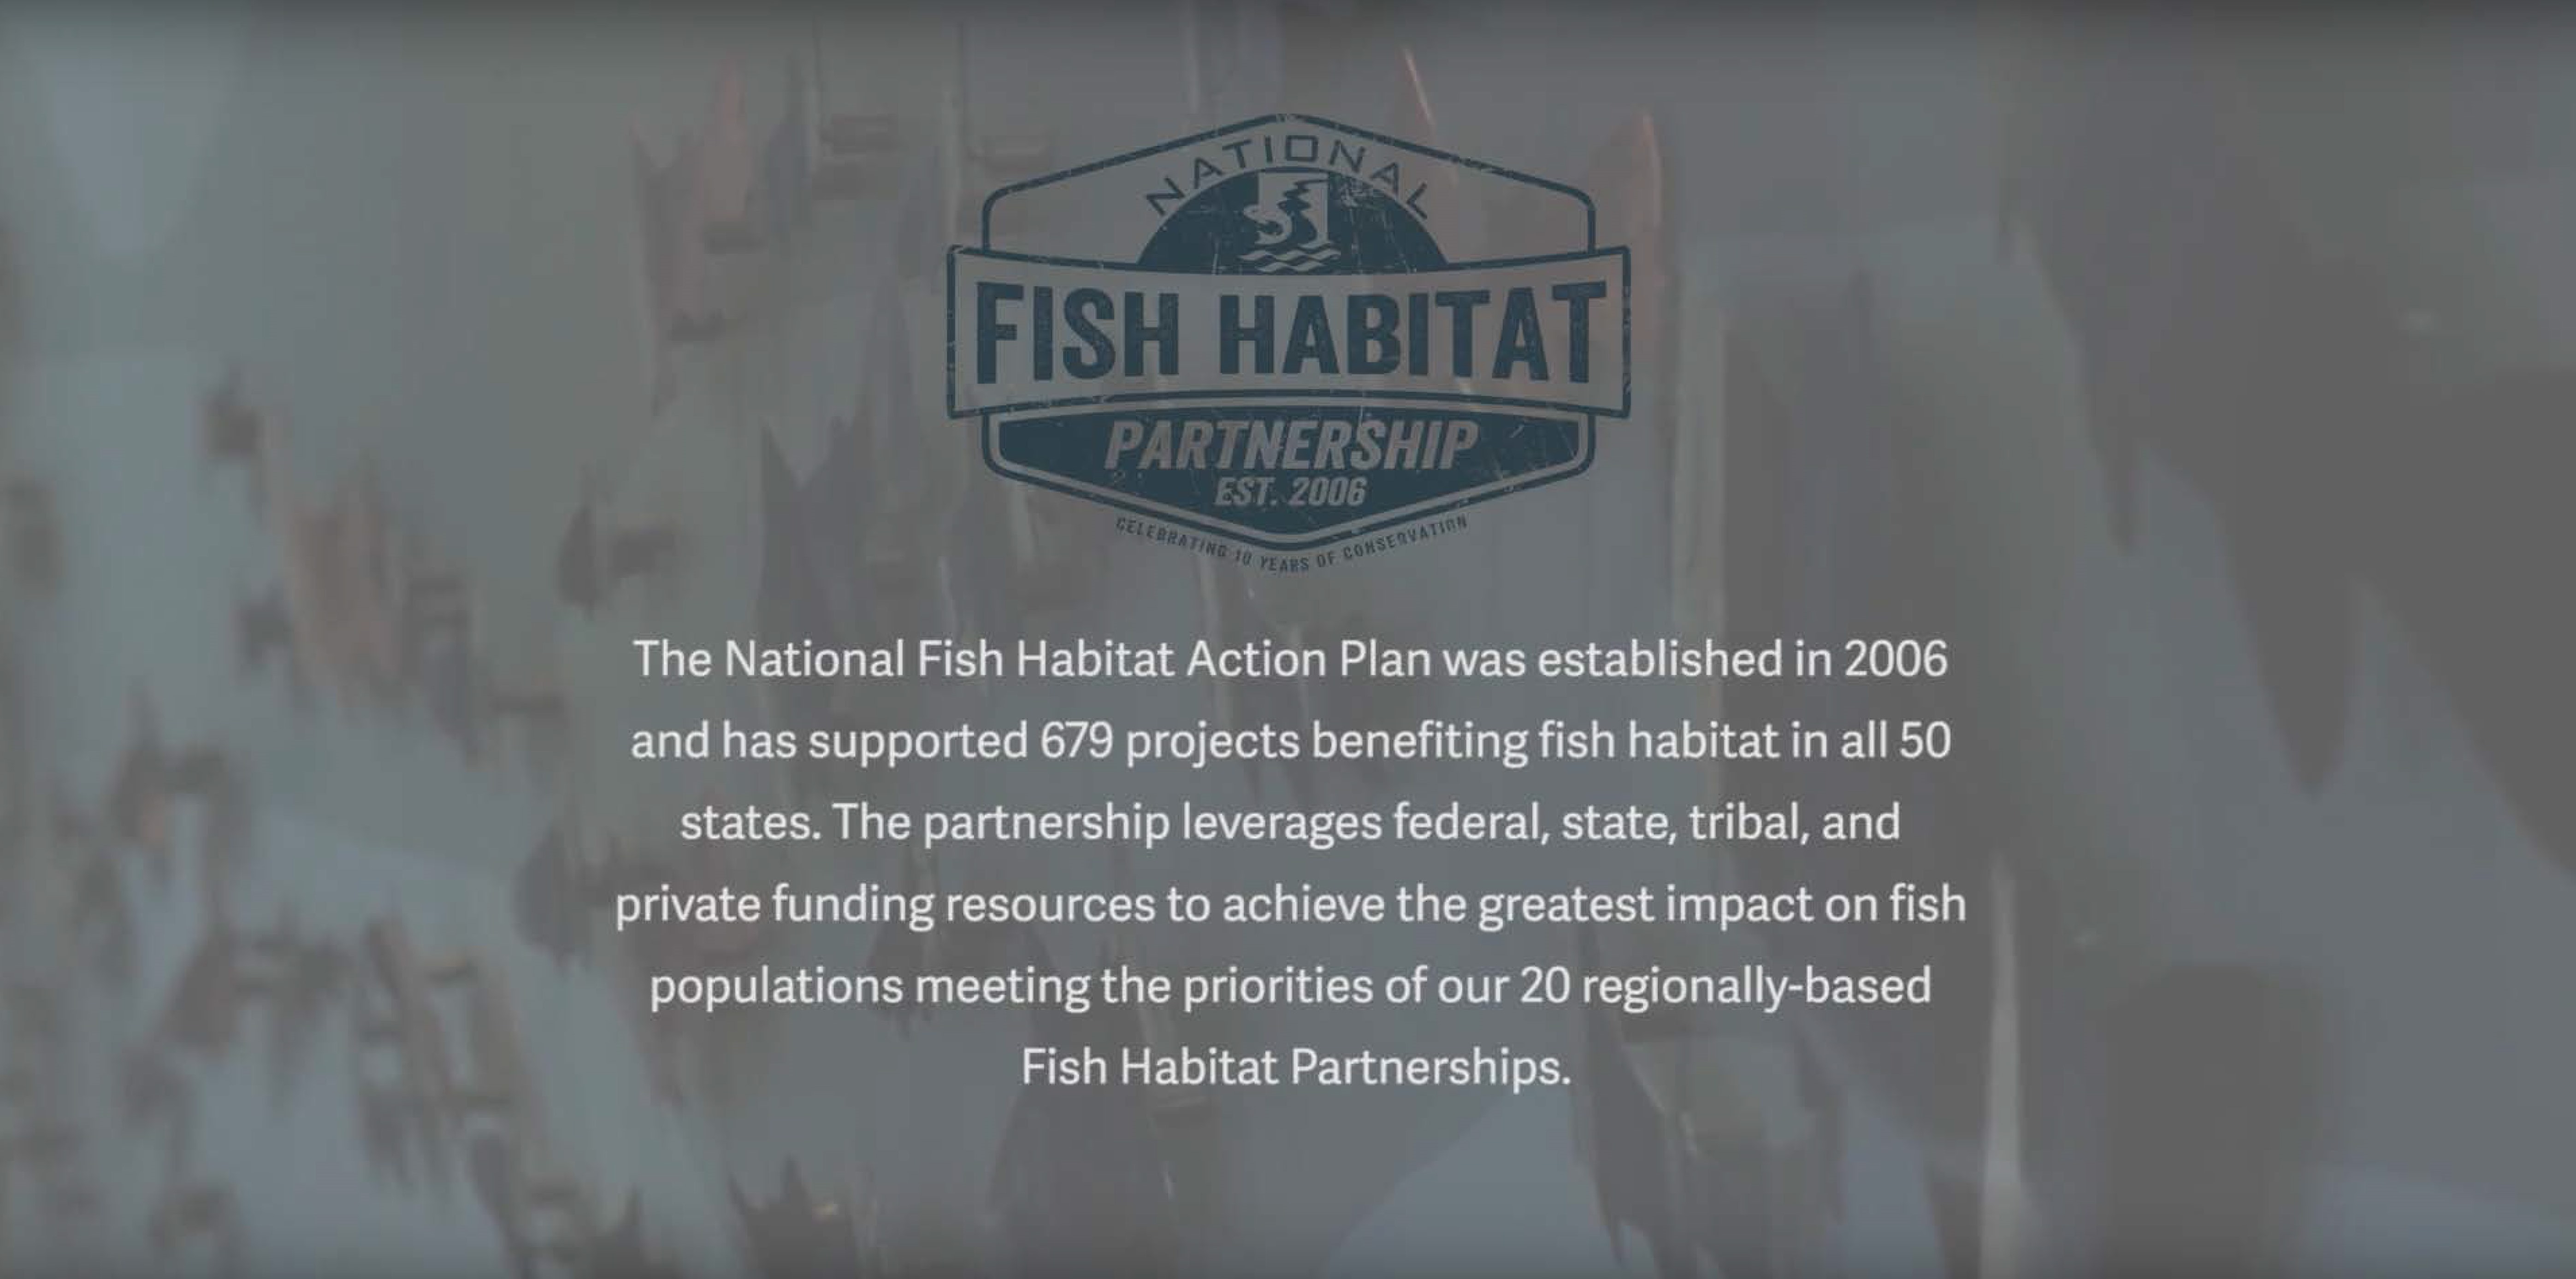 National Fish Habitat Partnership Releases “Our Story”